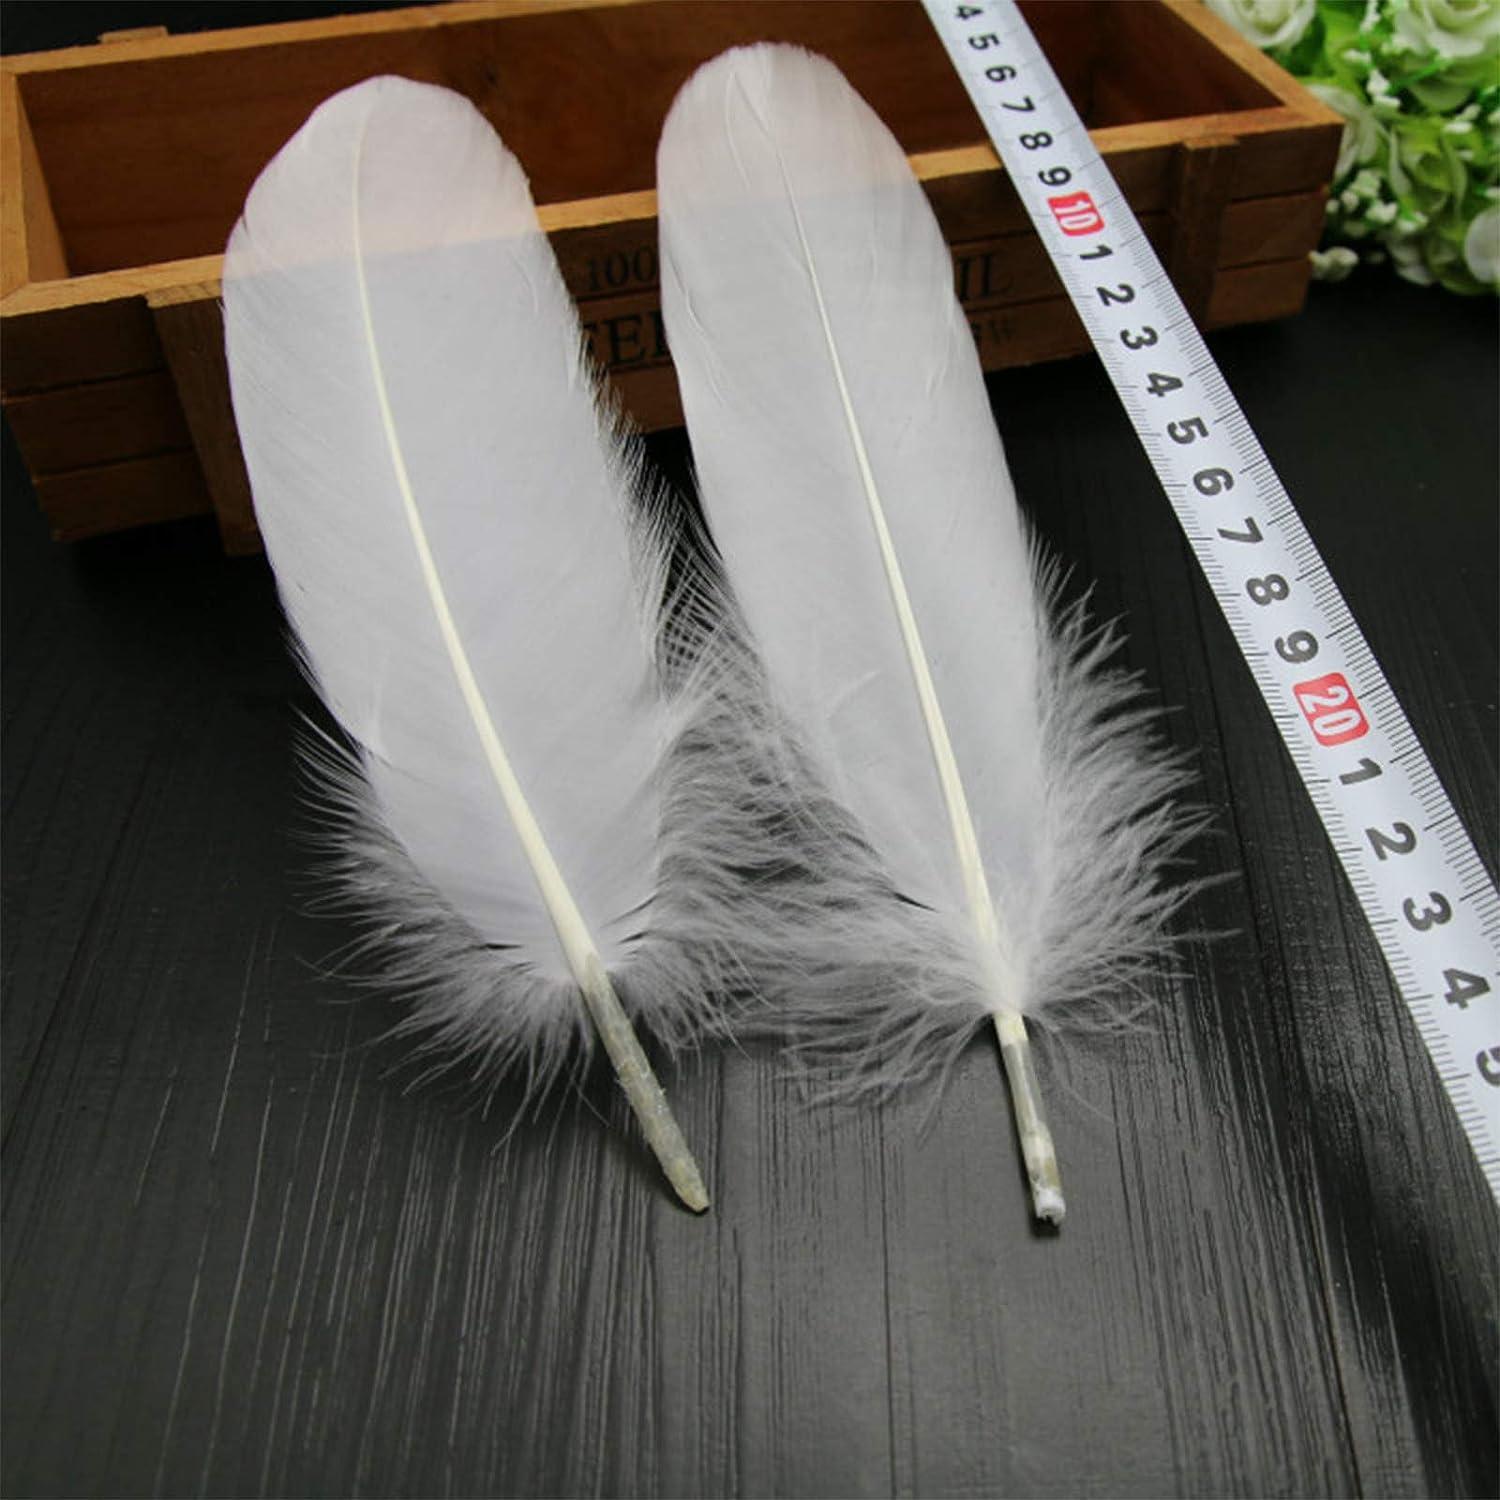 HaiMay 200 Pieces White Feathers for Craft Wedding Home Party